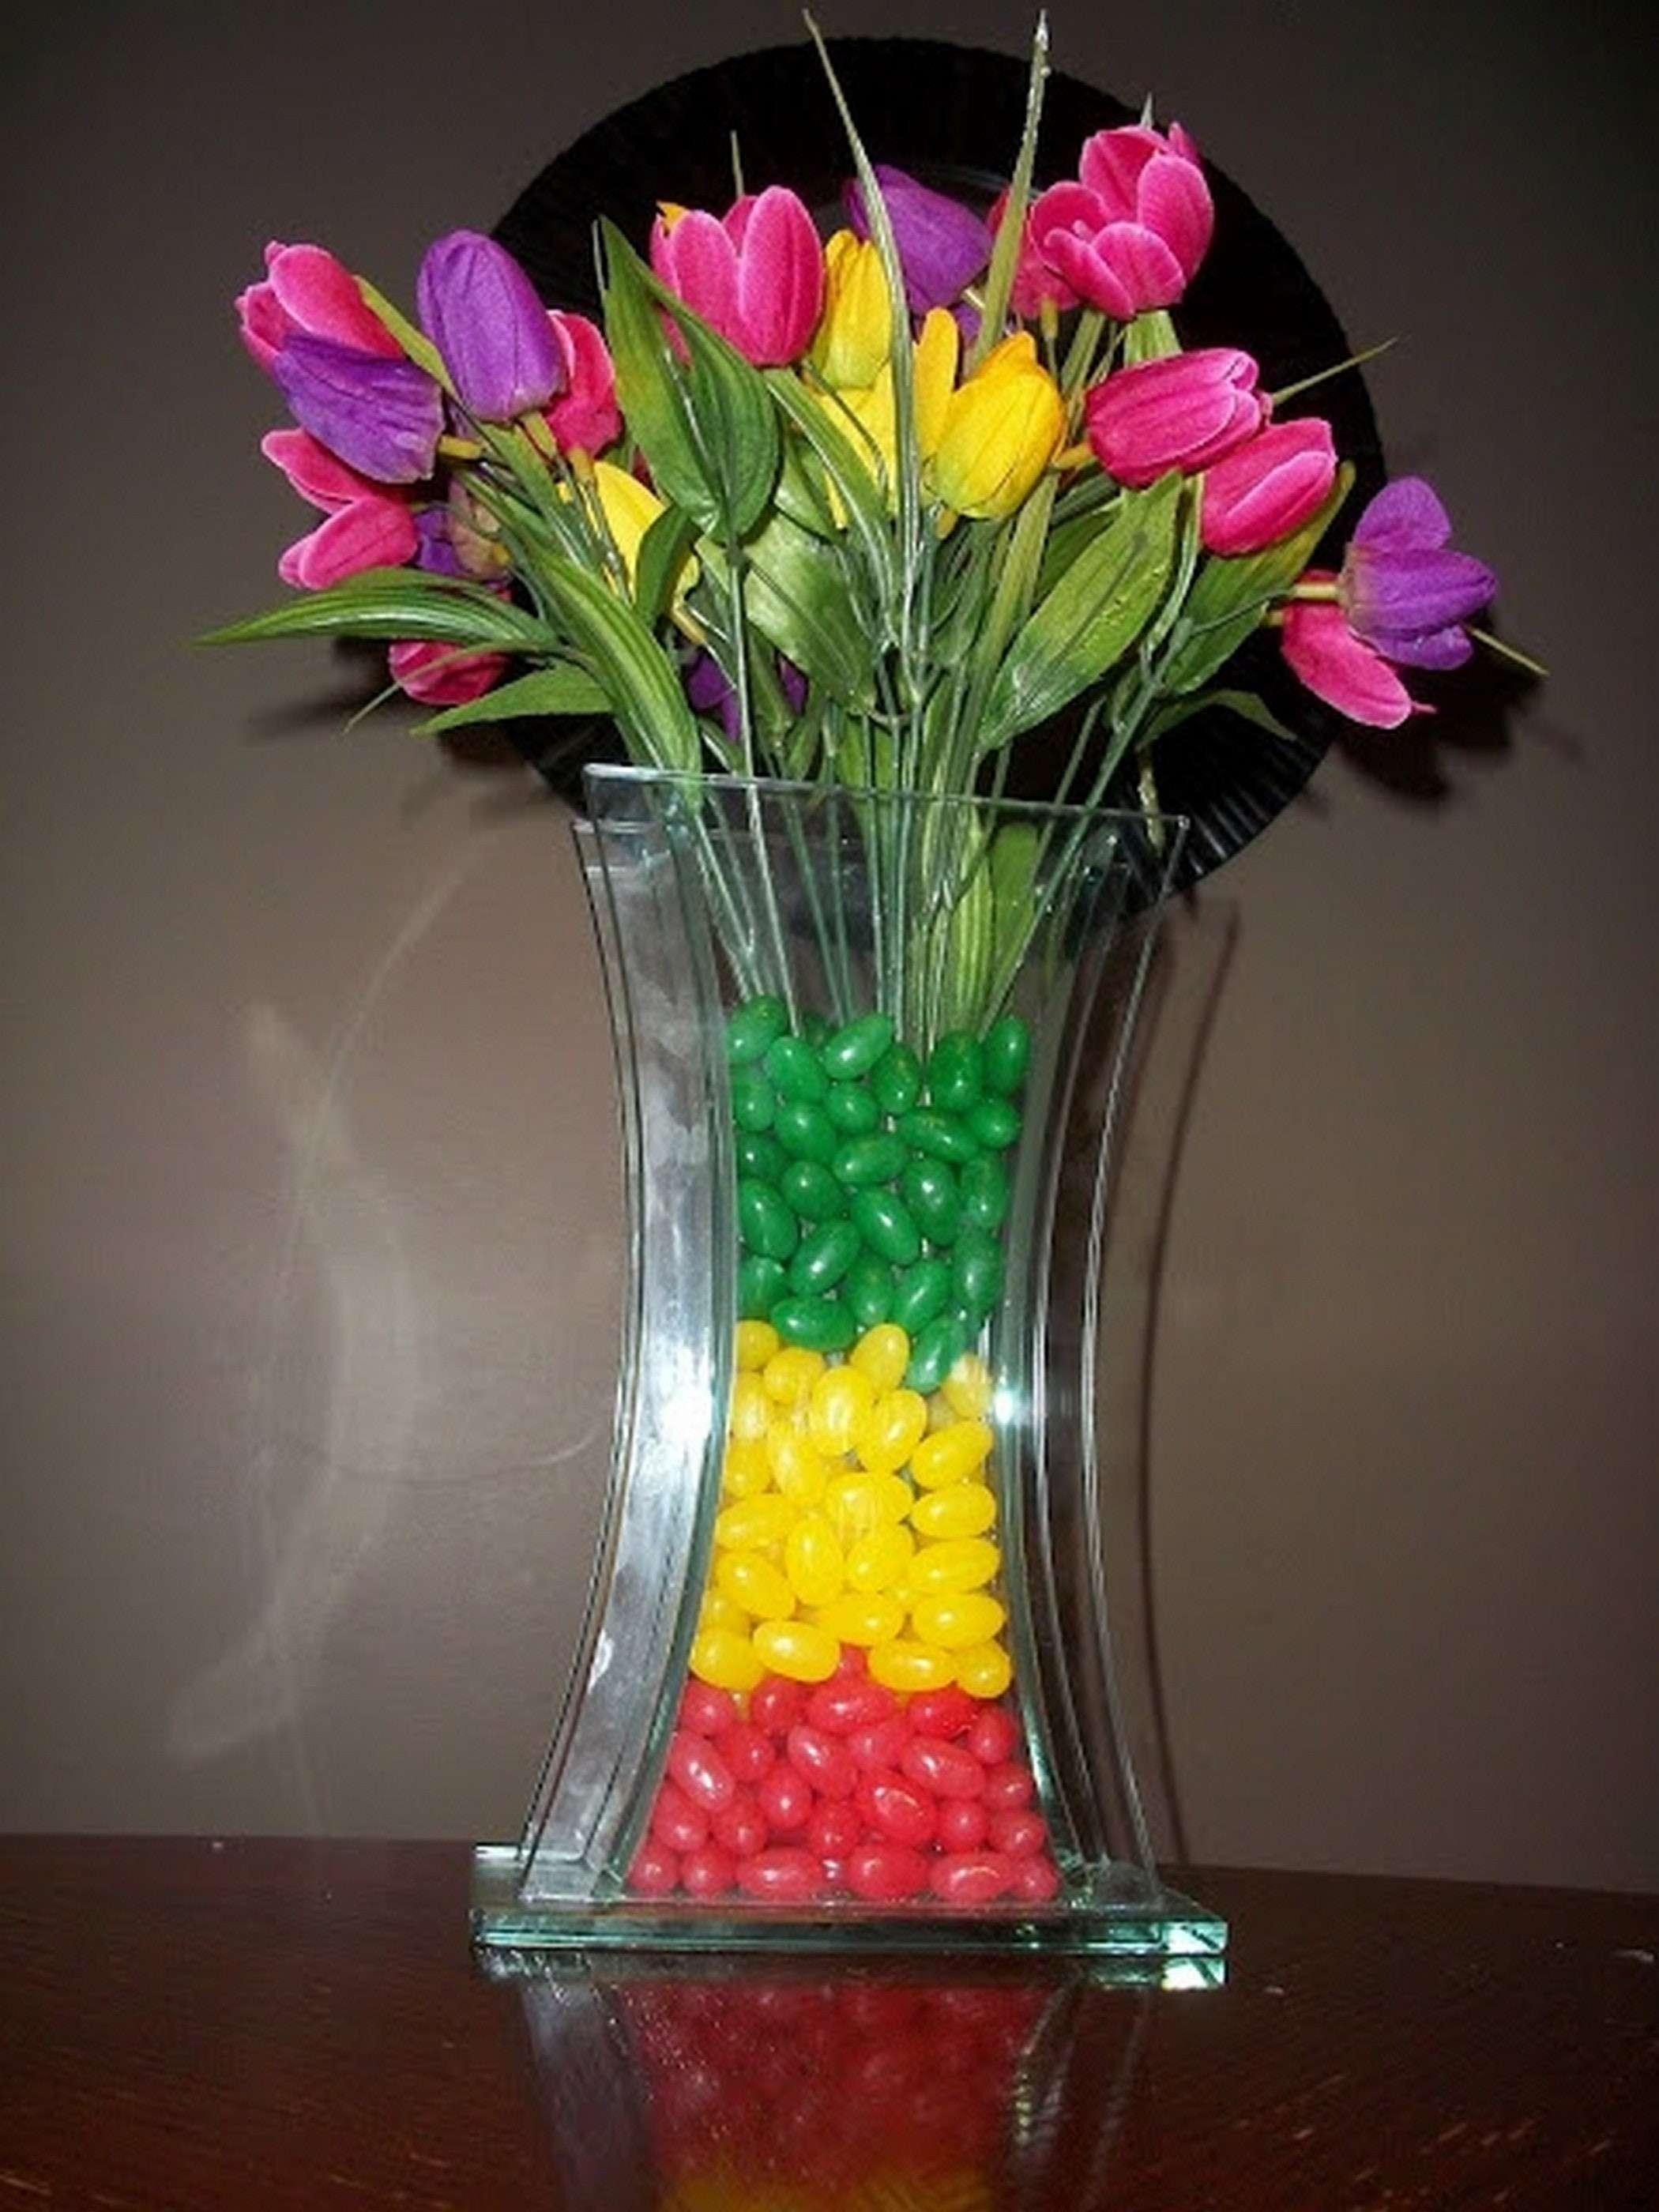 16 Unique Small Green Vase 2024 free download small green vase of easy diy ideas beautiful 15 cheap and easy diy vase filler ideas 3h inside easy diy ideas beautiful 15 cheap and easy diy vase filler ideas 3h vases flower i